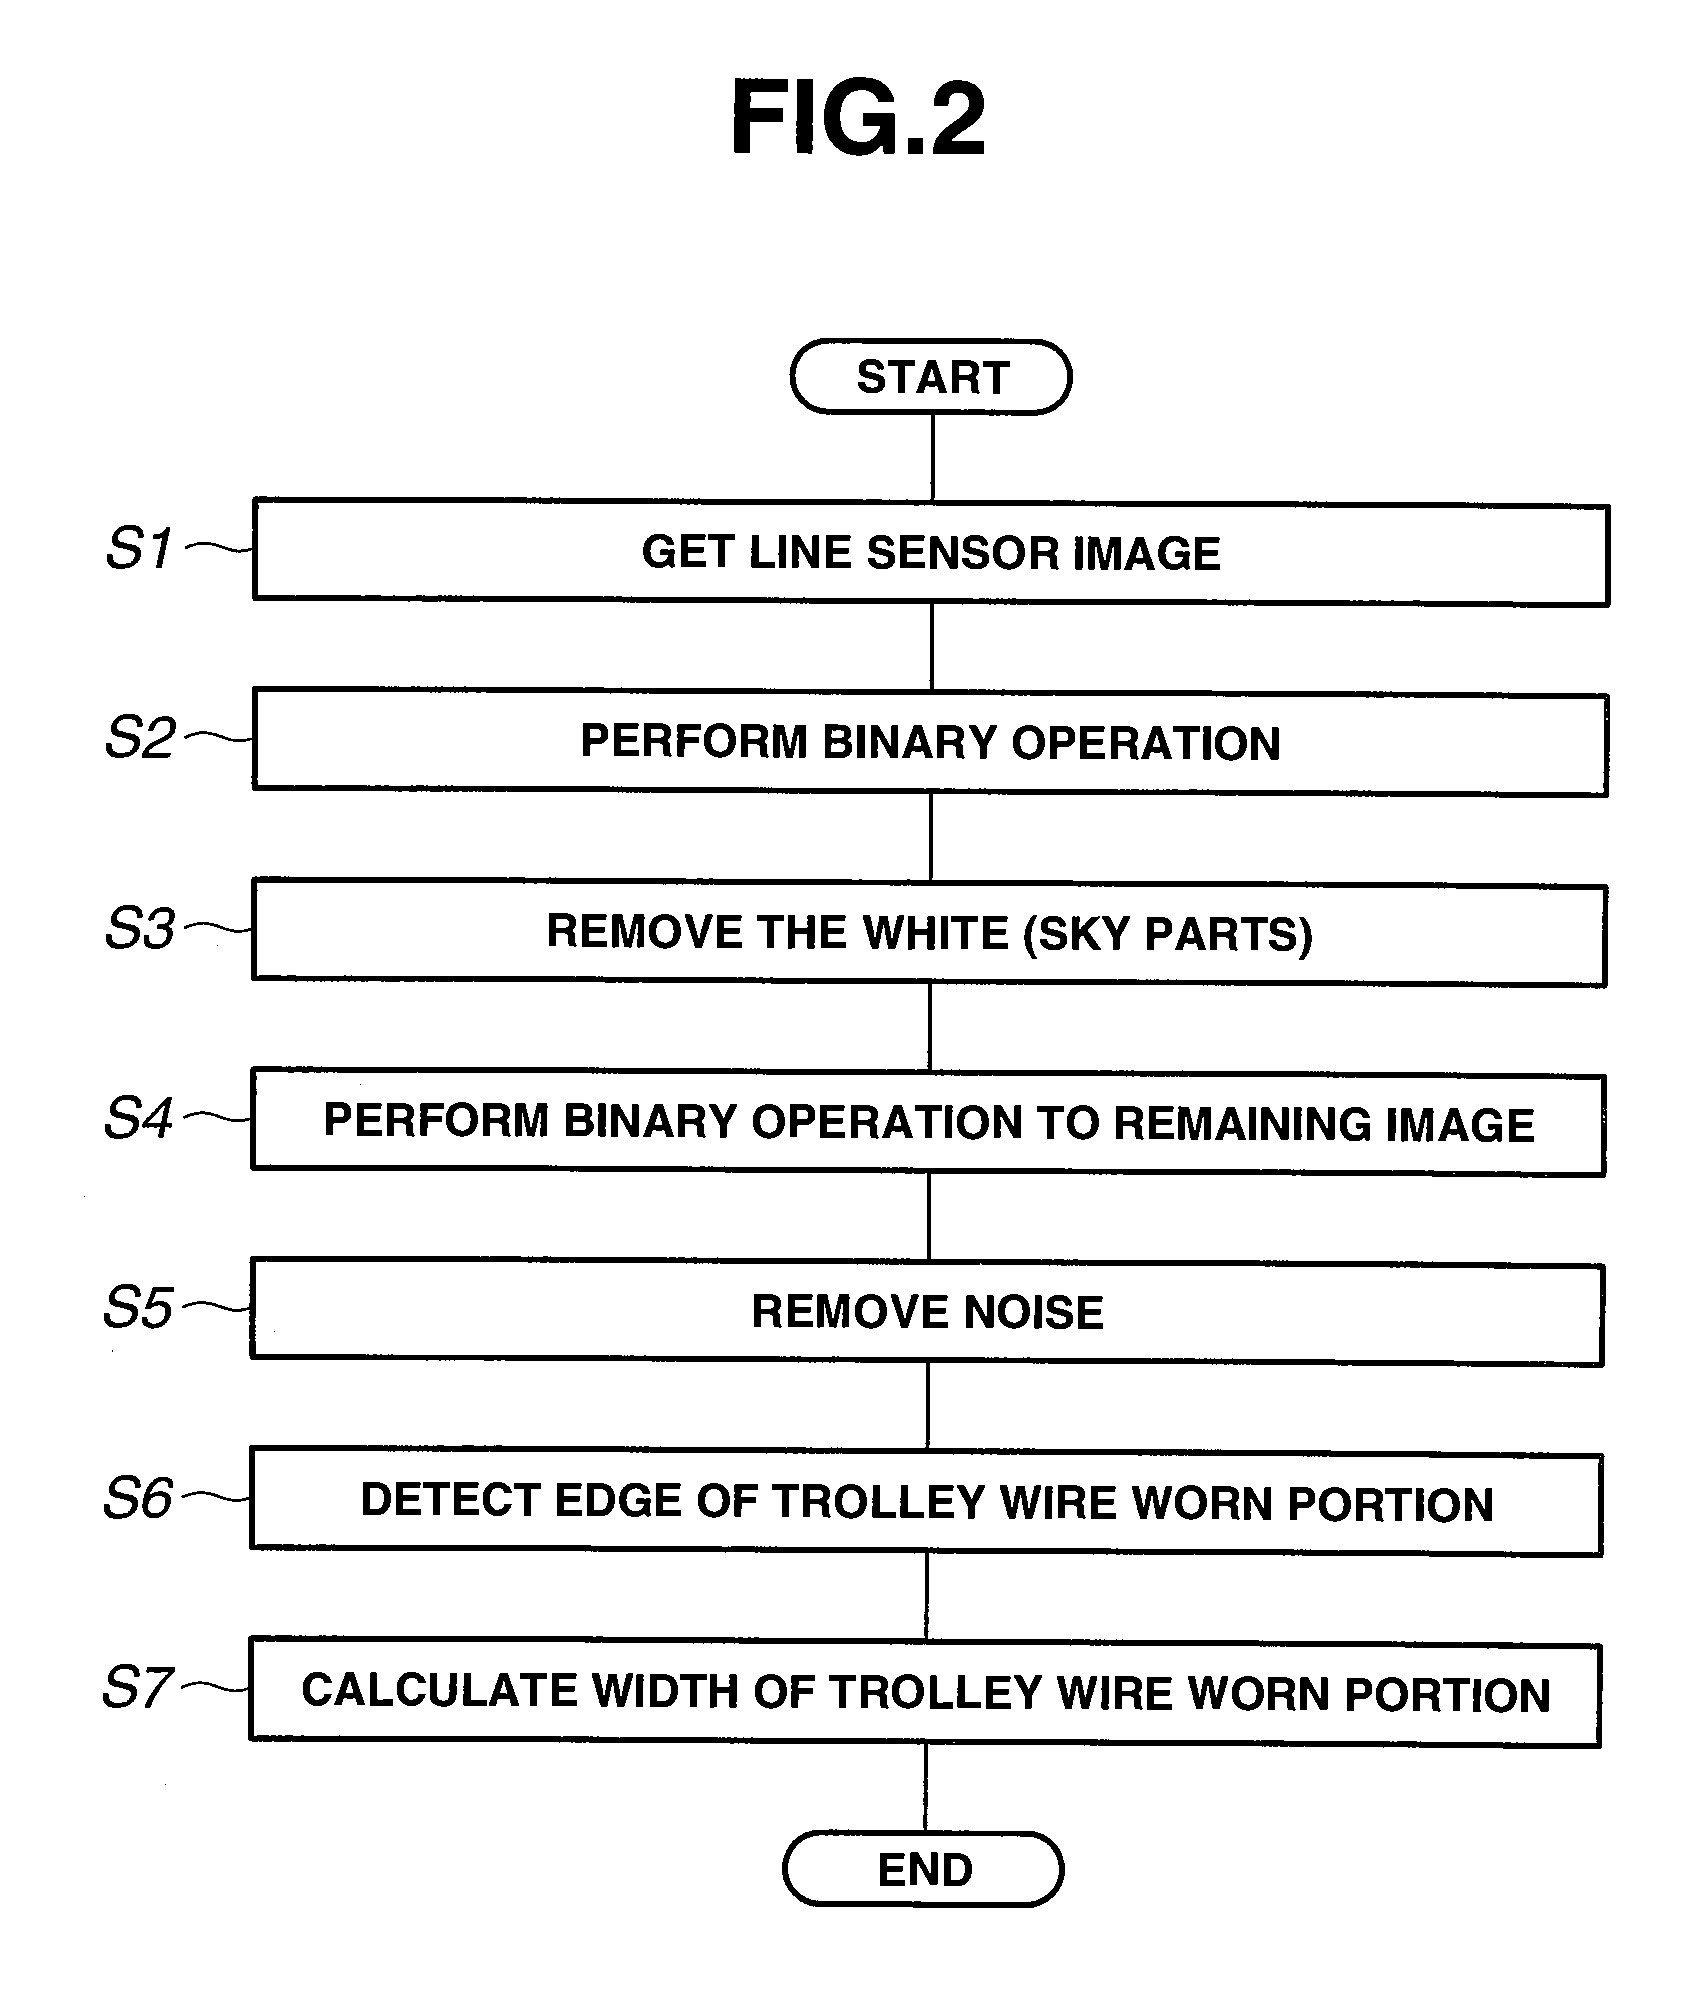 Trolley wire wear measuring device using binary operated images